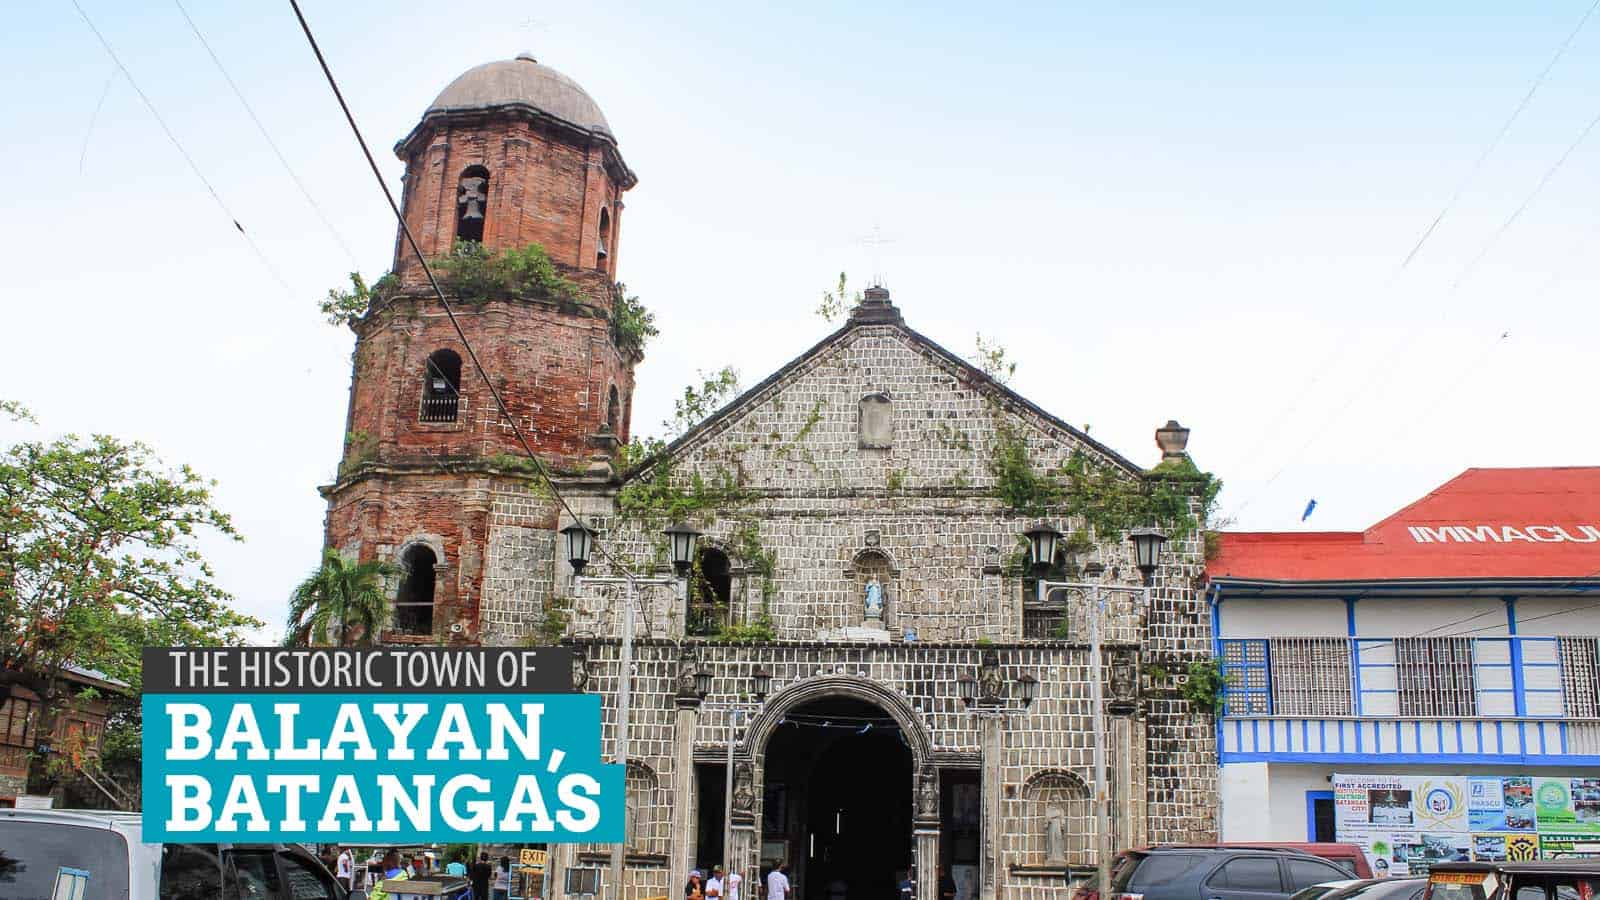 The Historic Town of Balayan, Batangas, Philippines